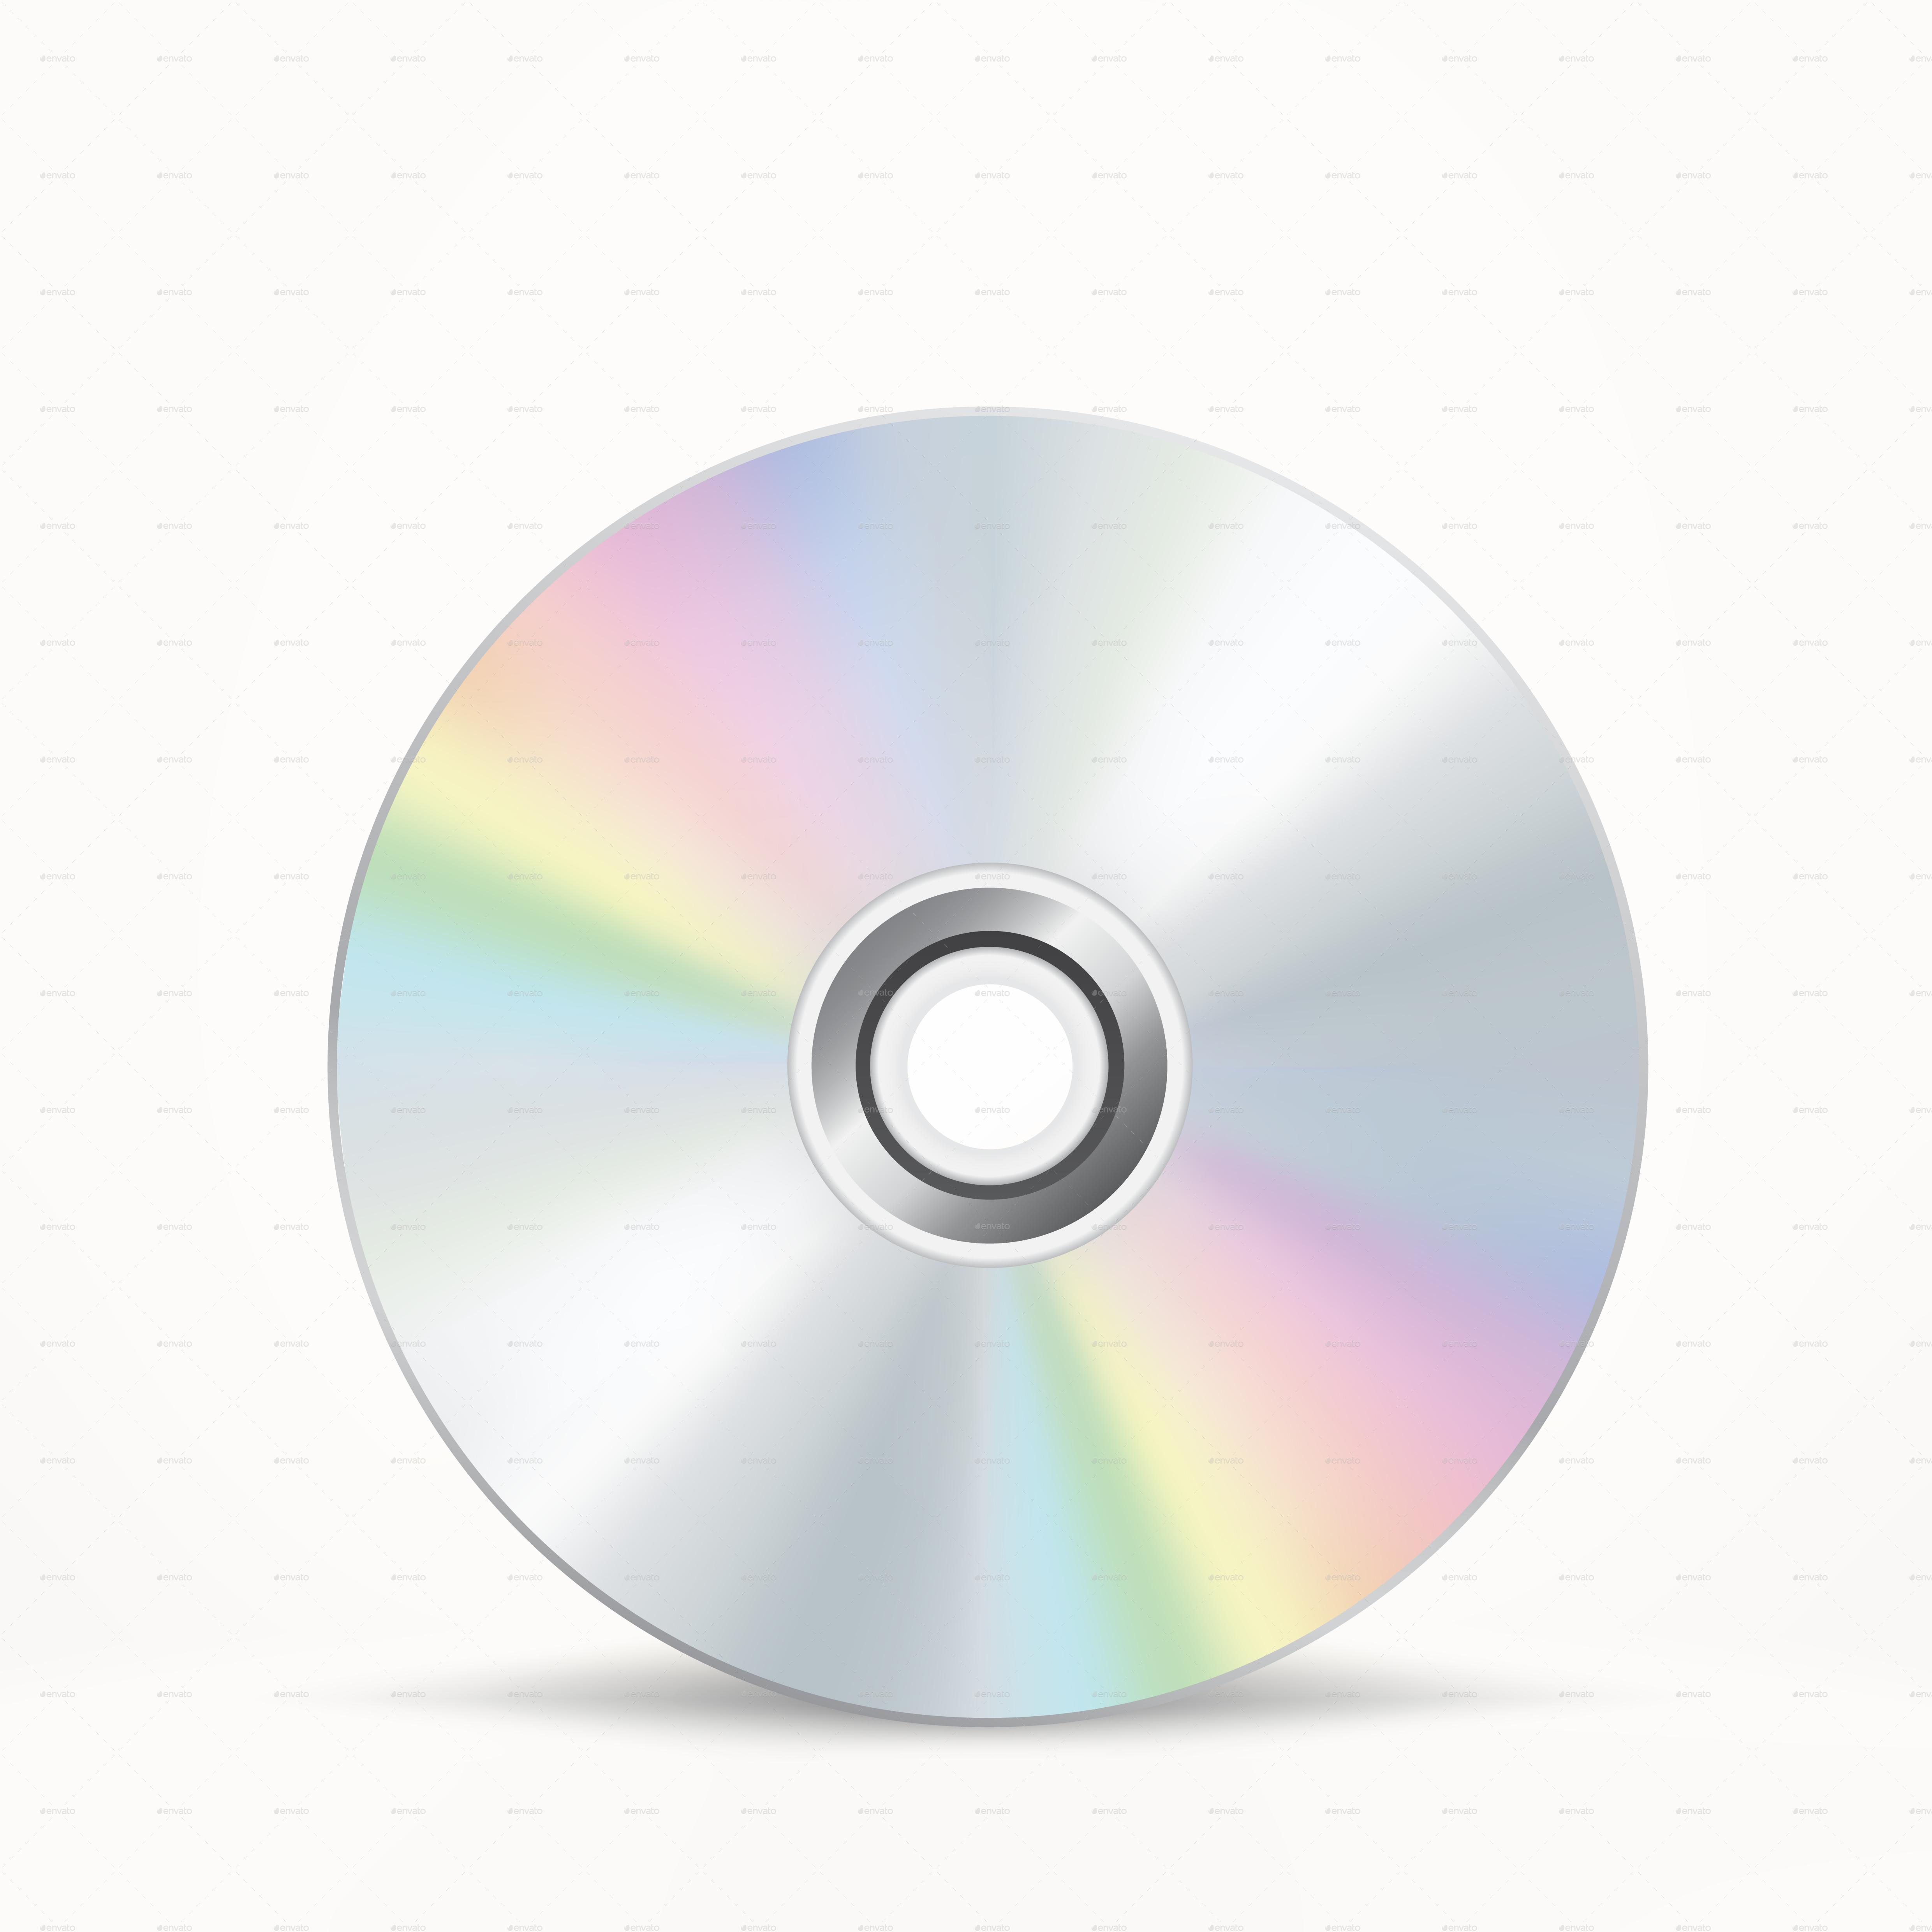 Cd Dvd Disc By Romvo Graphicriver